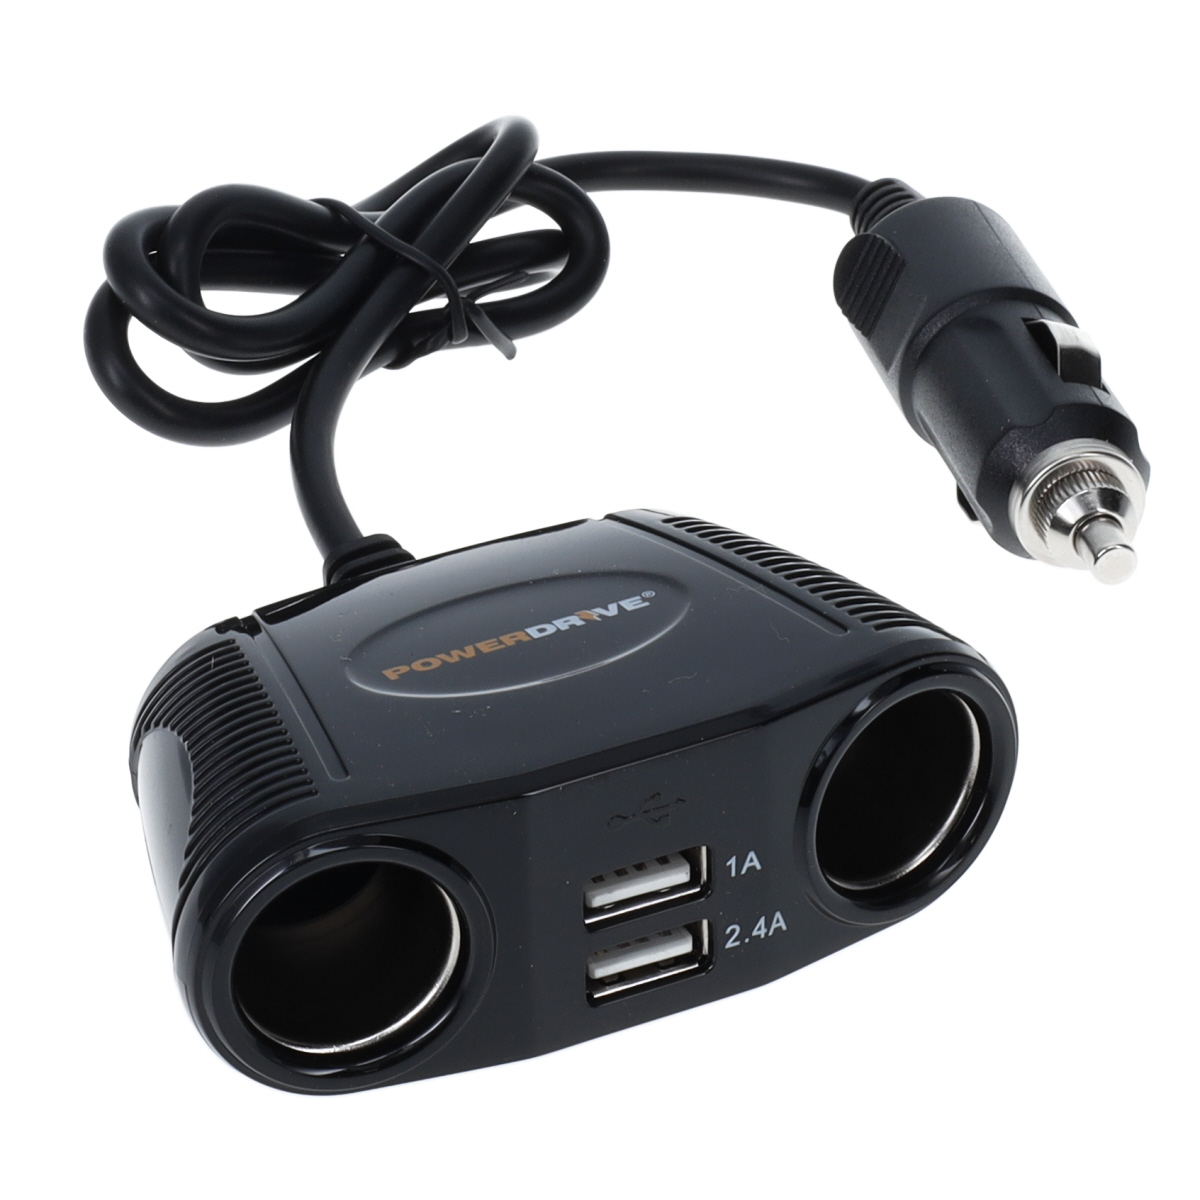 PowerDrive 12V 2-Way Corded Adapter with 2 USB Port PD9431USB - Cigarette Lighter USB Charger Car Adapter for Plug Outlet Multi 